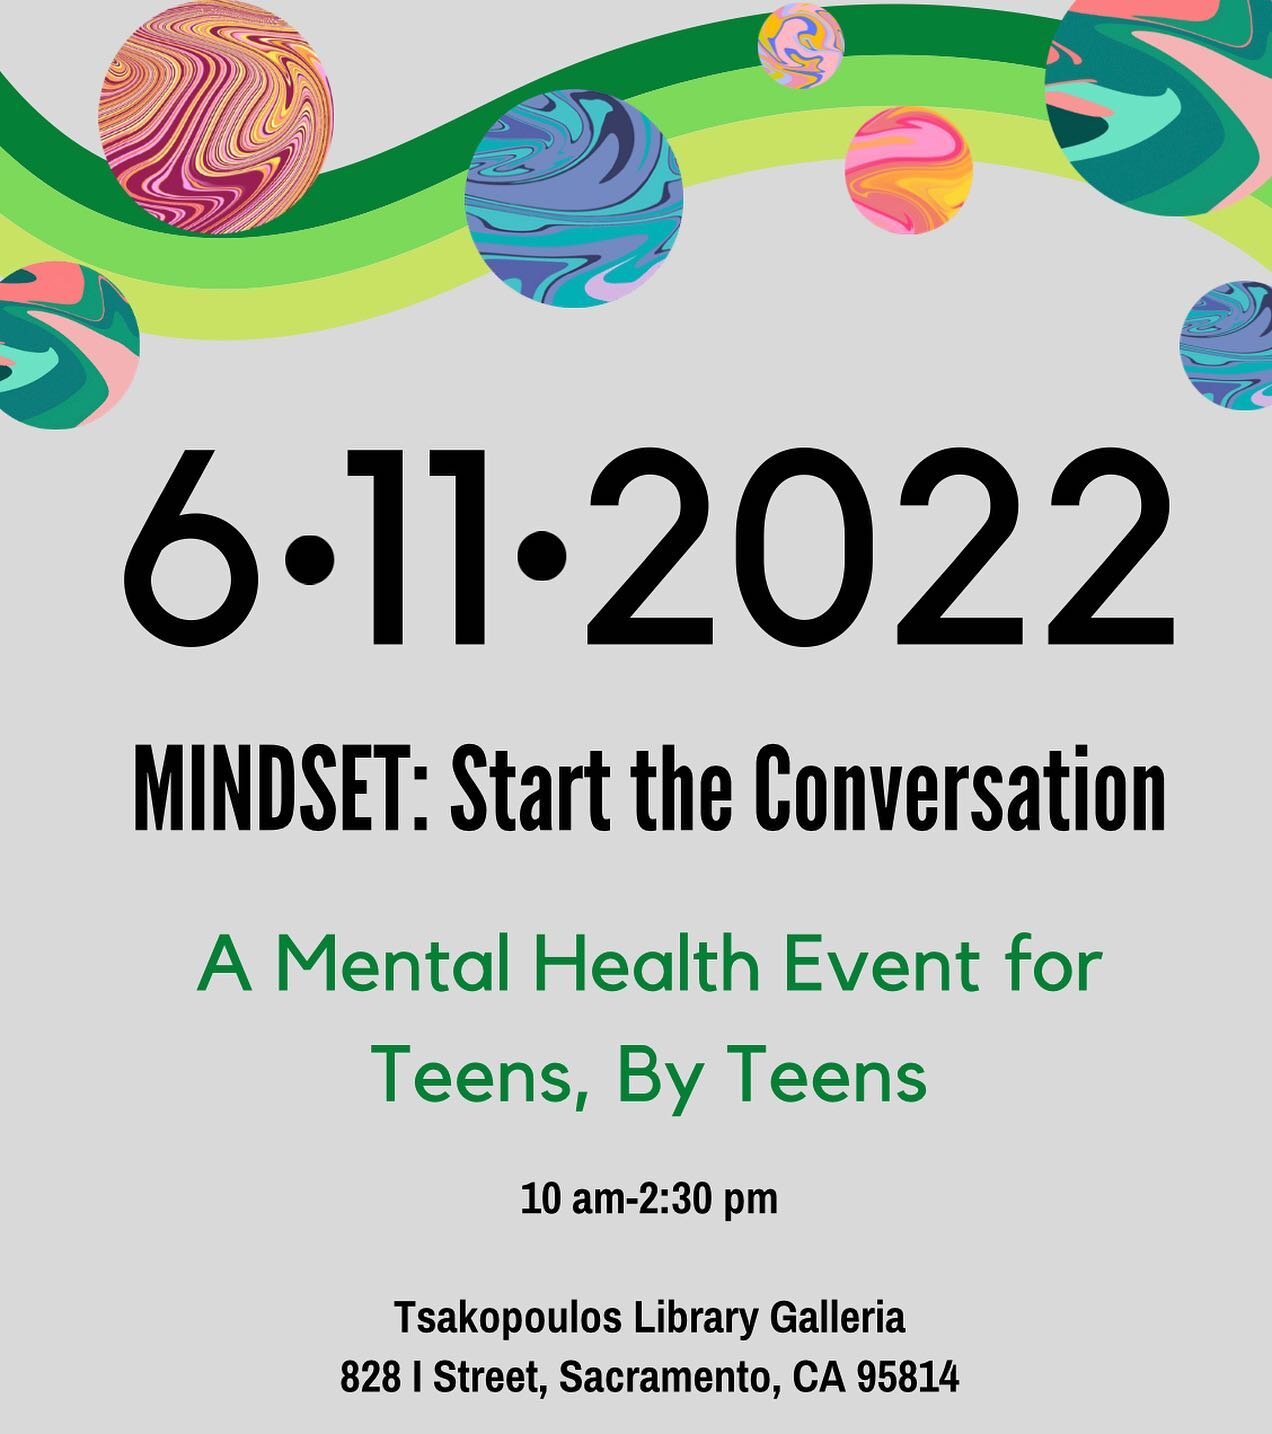 If you haven&rsquo;t registered yet&hellip; link in bio! The first 75 people to register will receive a $25 gift card after the event 💚

Food will be provided as well as t-shirts and other swag! The event is entirely free.